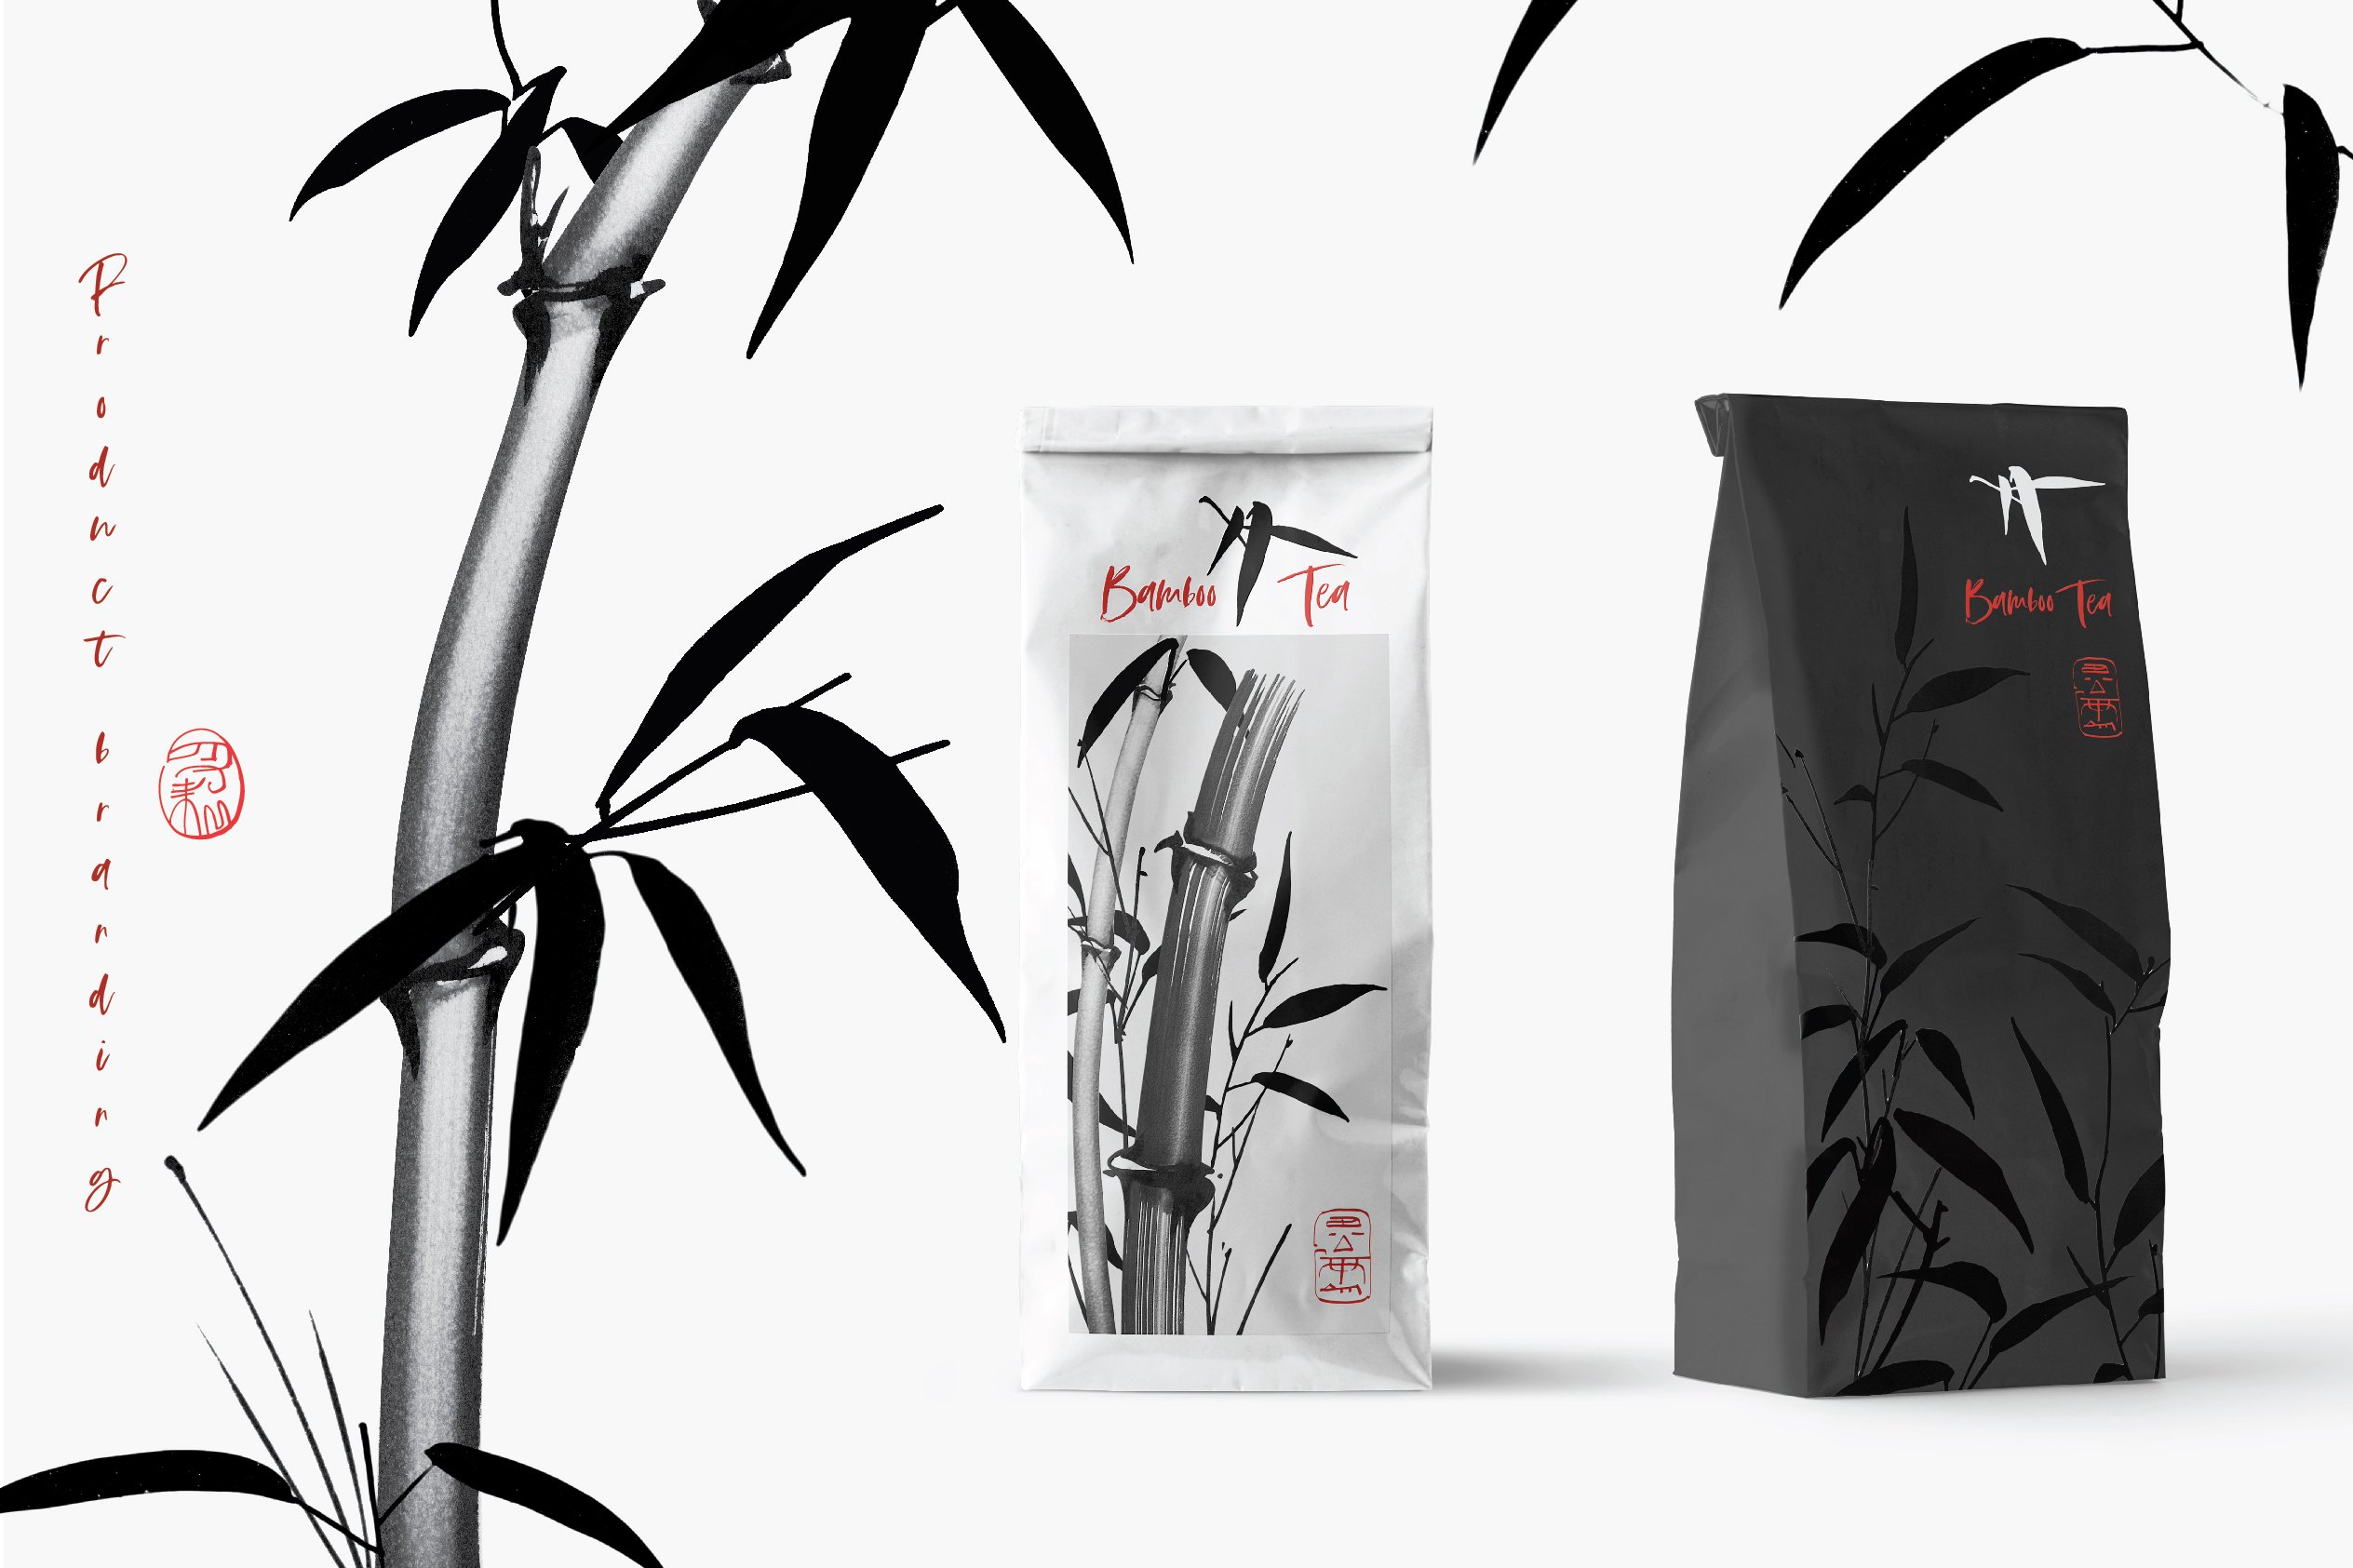 Black and white photo of a bag of tea next to a bamboo plant.